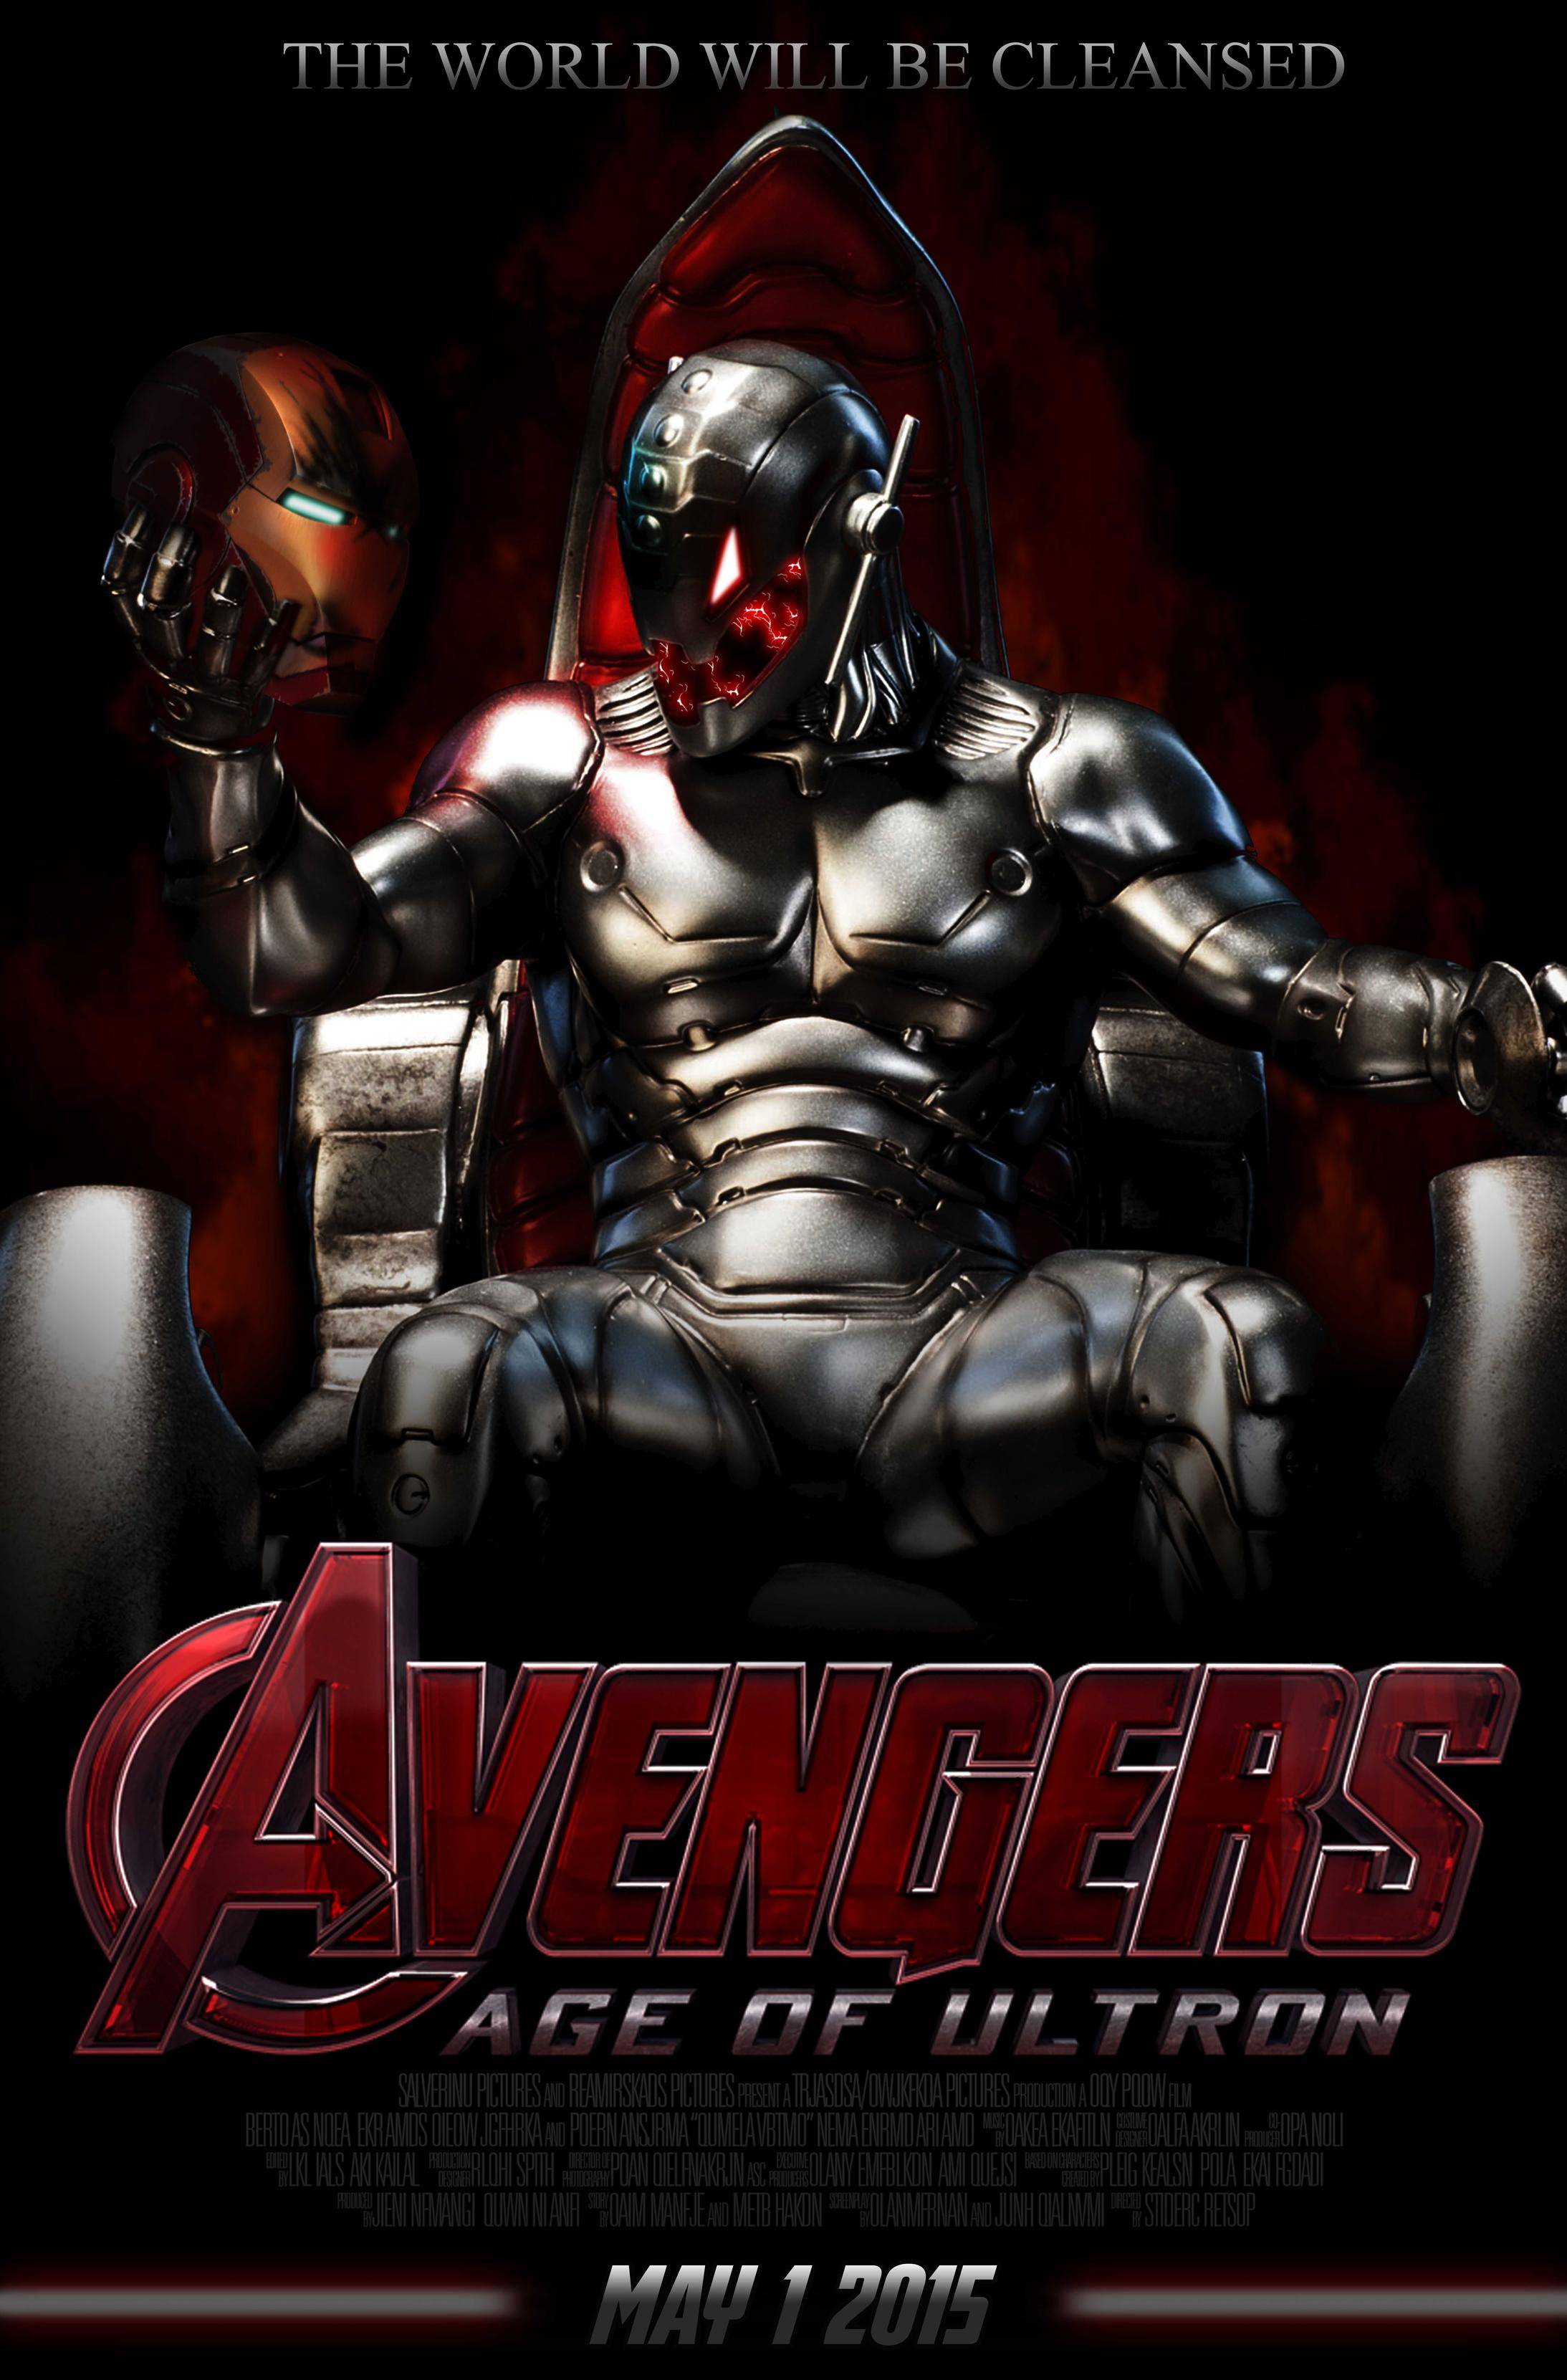 The Avengers Age Of Ultron Wallpaper - Free Android Application